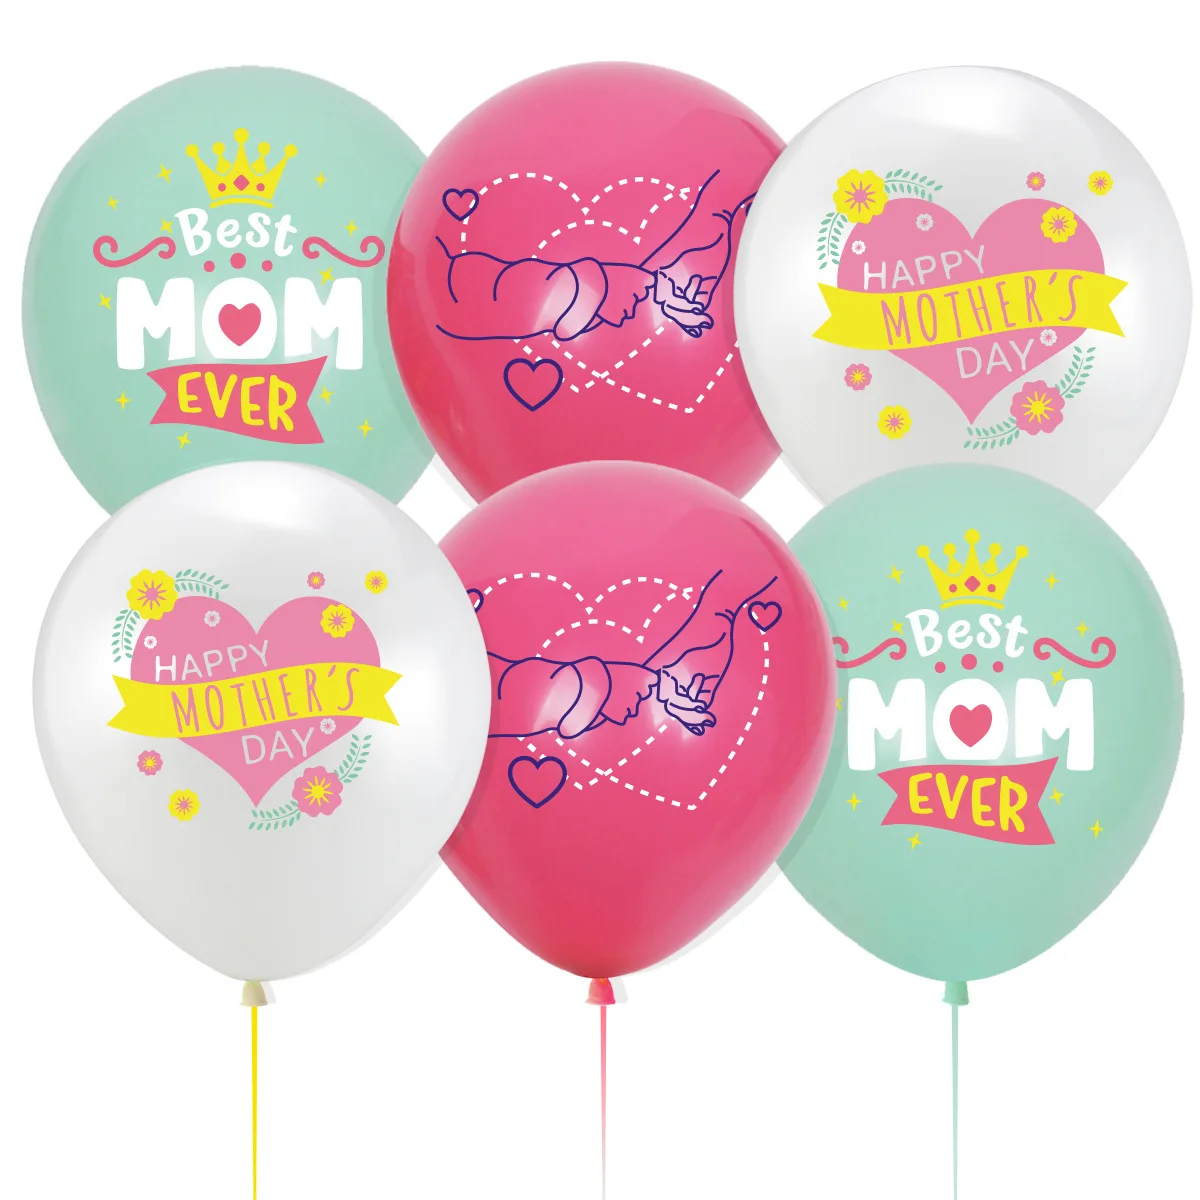 

10pcs/set 12inch Happy Mothers Day Balloon Best Mom Latex Balloon Mother's Day Party Decoration Favors Supplies